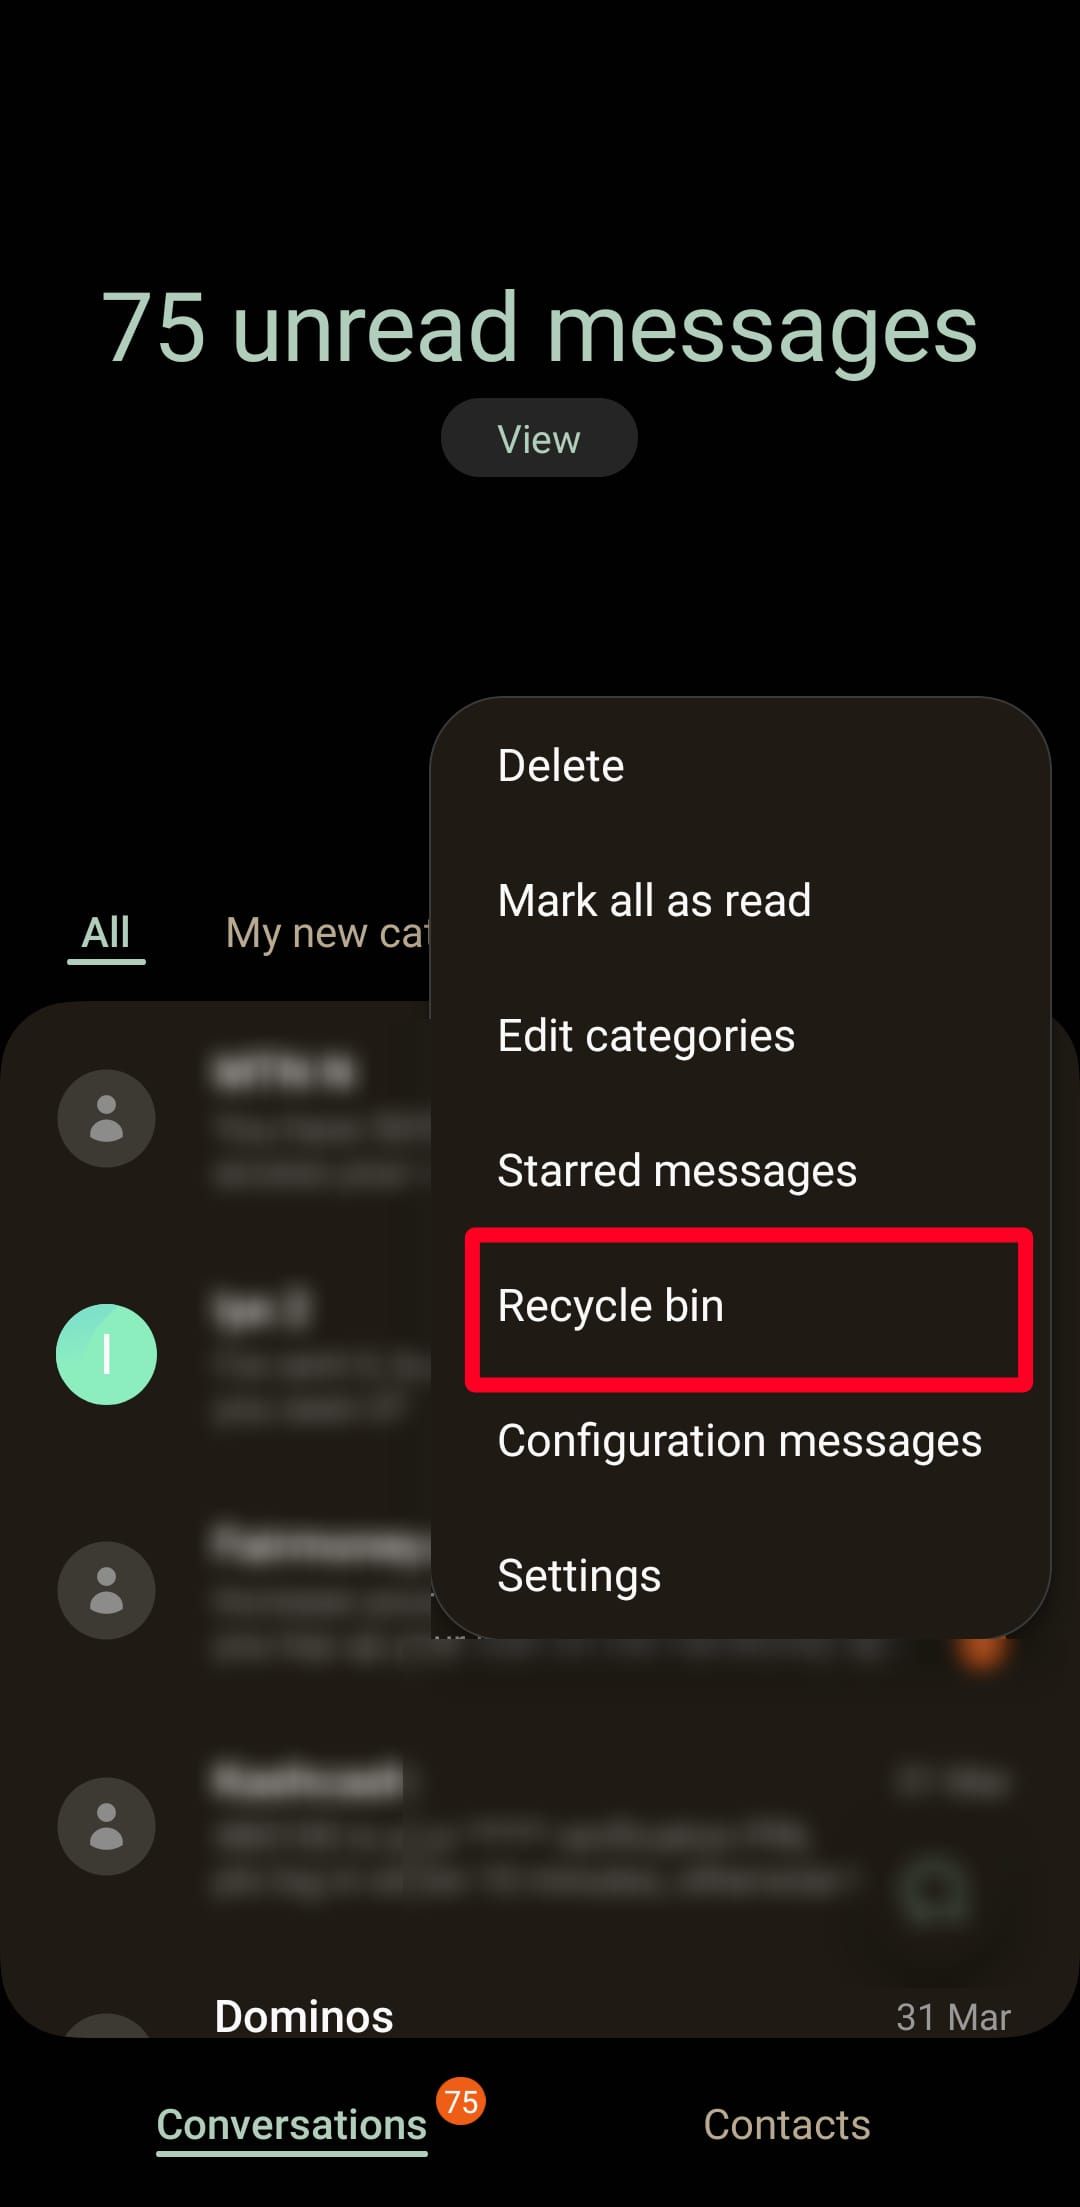 The Samsung Messages app options list with the Recycle bin option highlighted with a red box